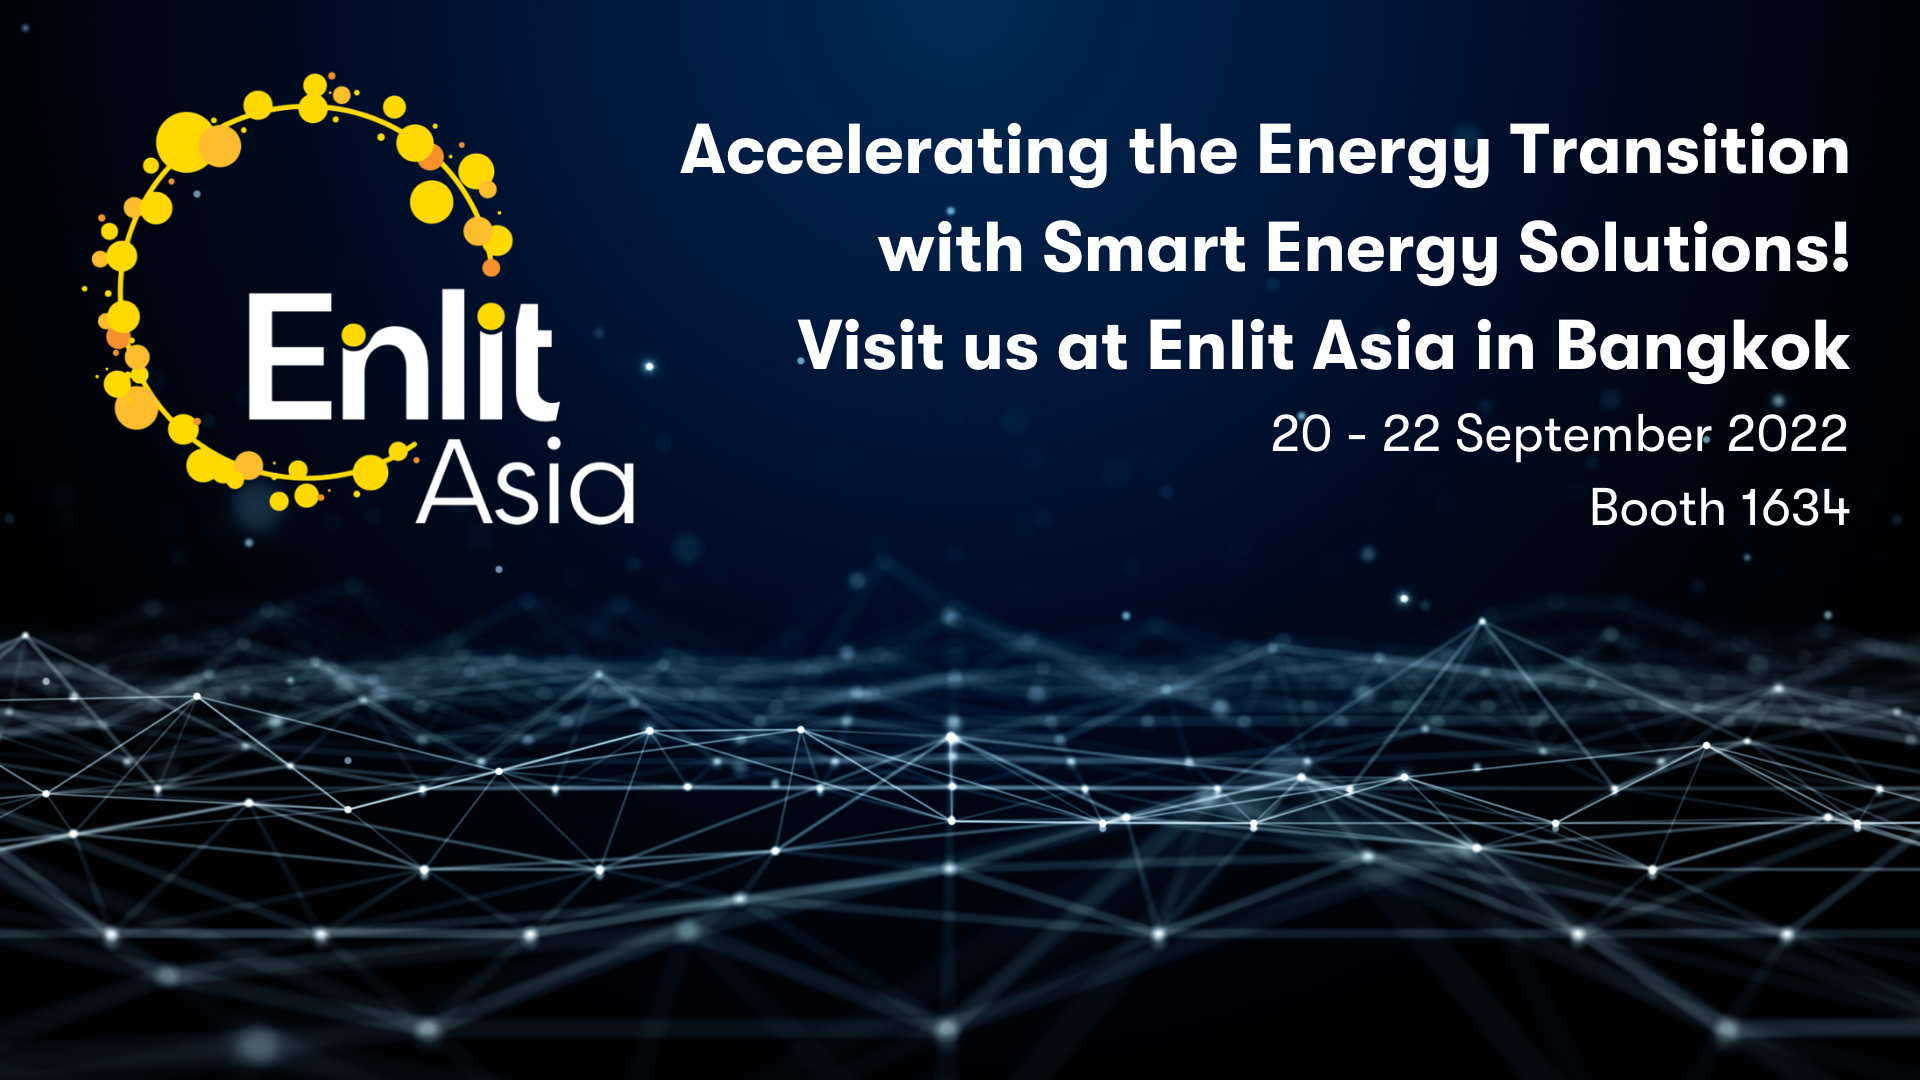 uploads/pics/https://systemtechnologies.iqony.energy/uploads/pics/Accelerating_the_Energy_Transition_with_Smart_Digital_Solutions_Visit_us_at_Enlit_Asia_in_Bangkok__1__01.png